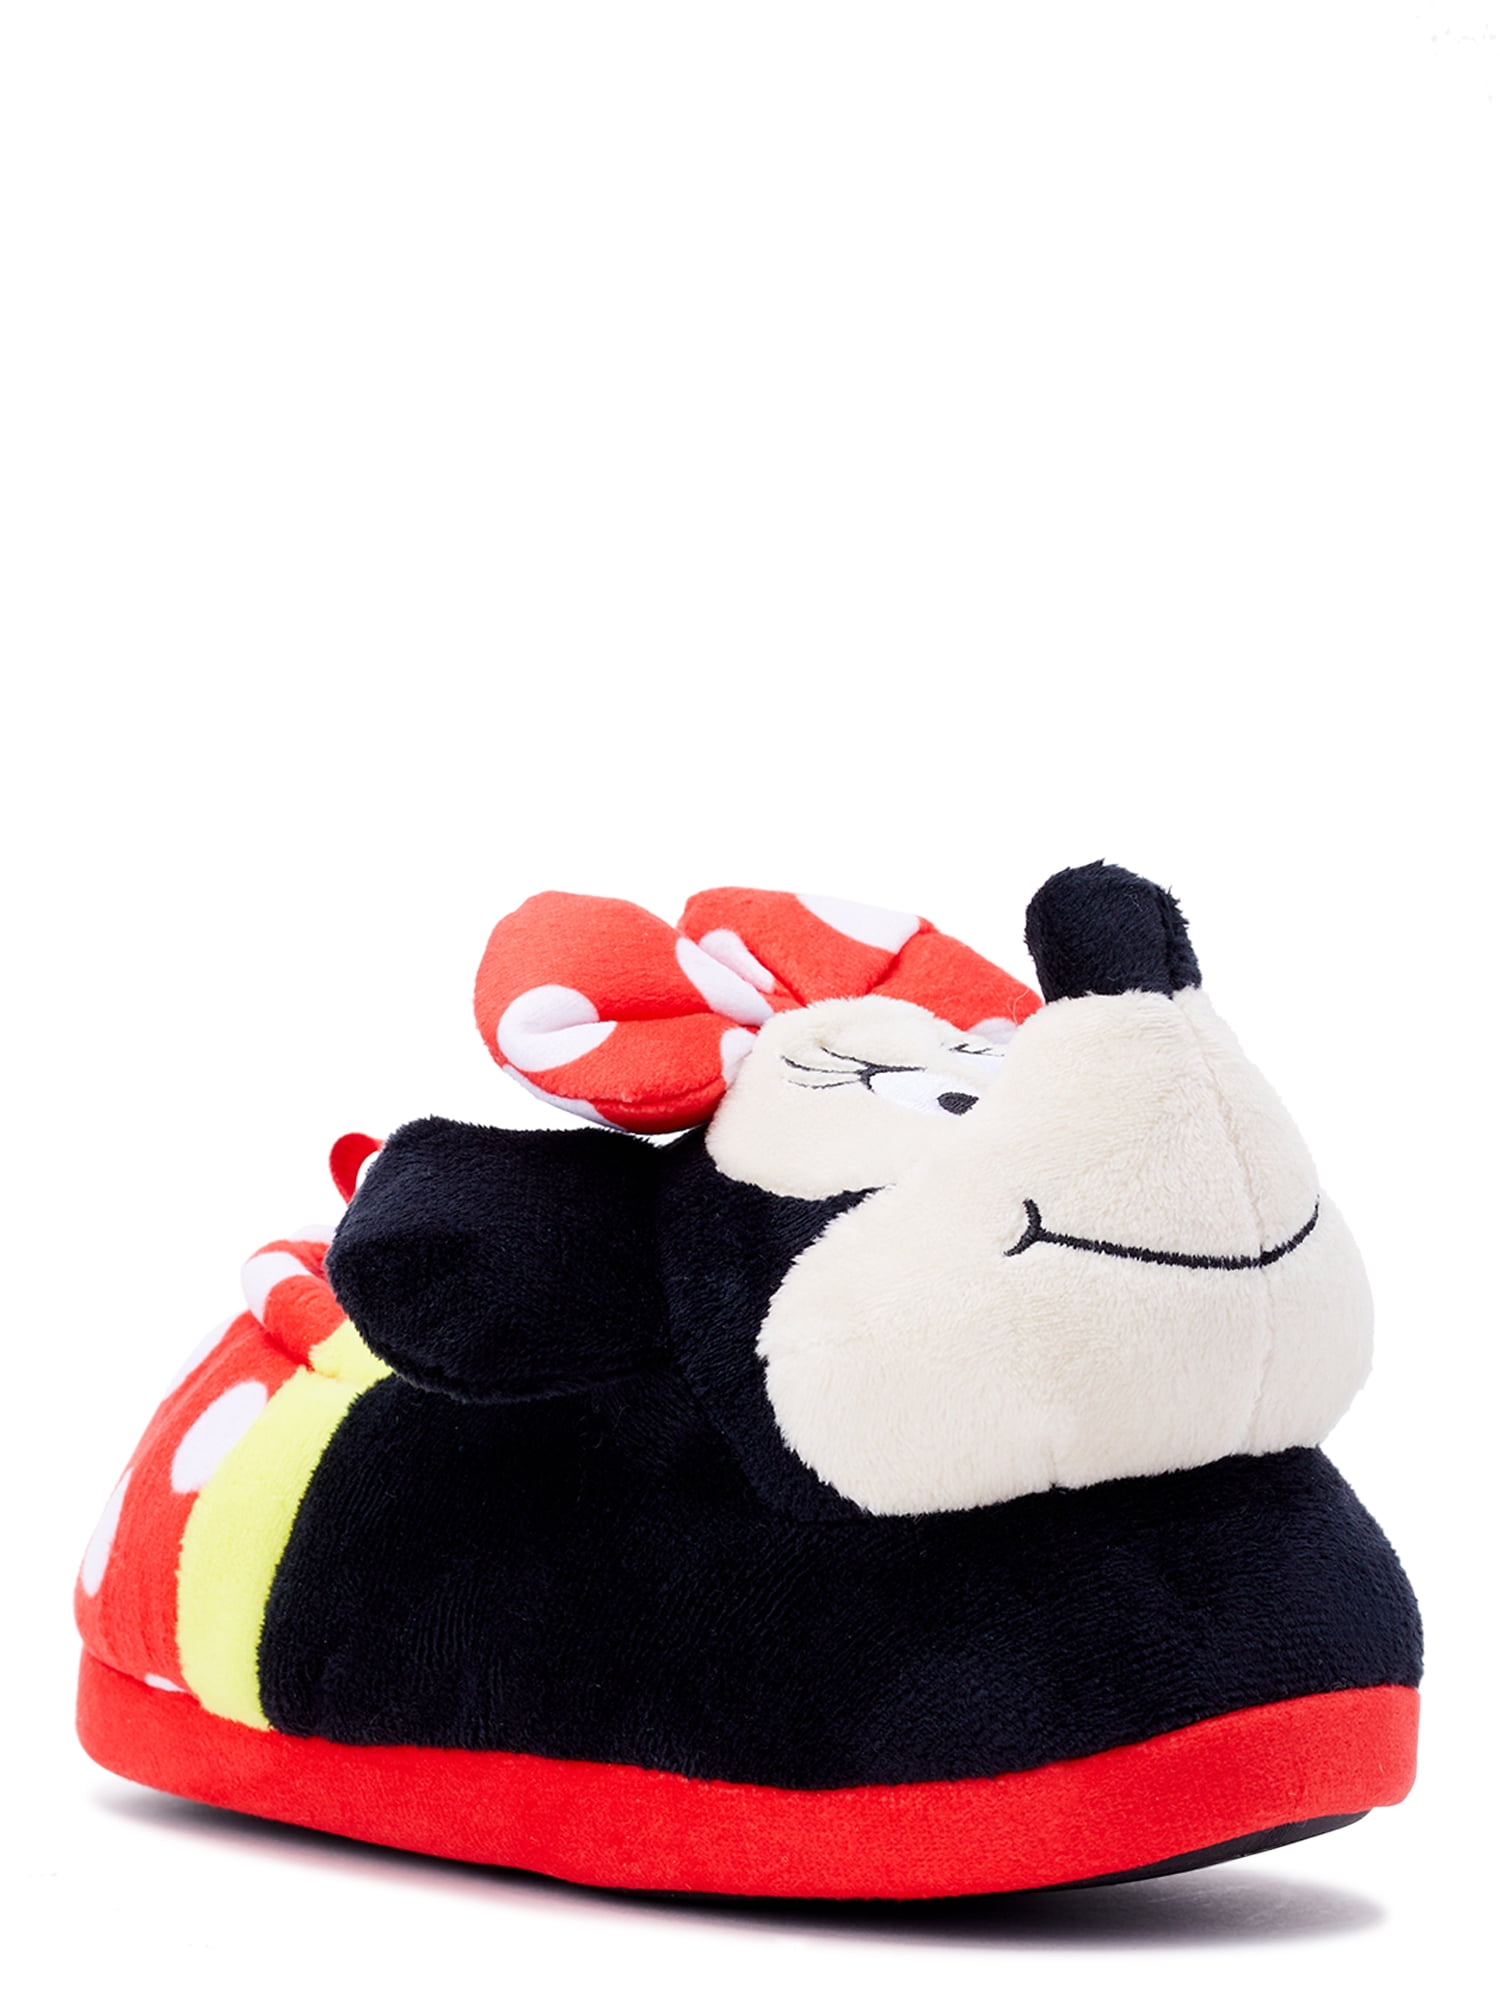 Minnie Mouse Toddler Girls Slippers, Sizes 5/6-11/12